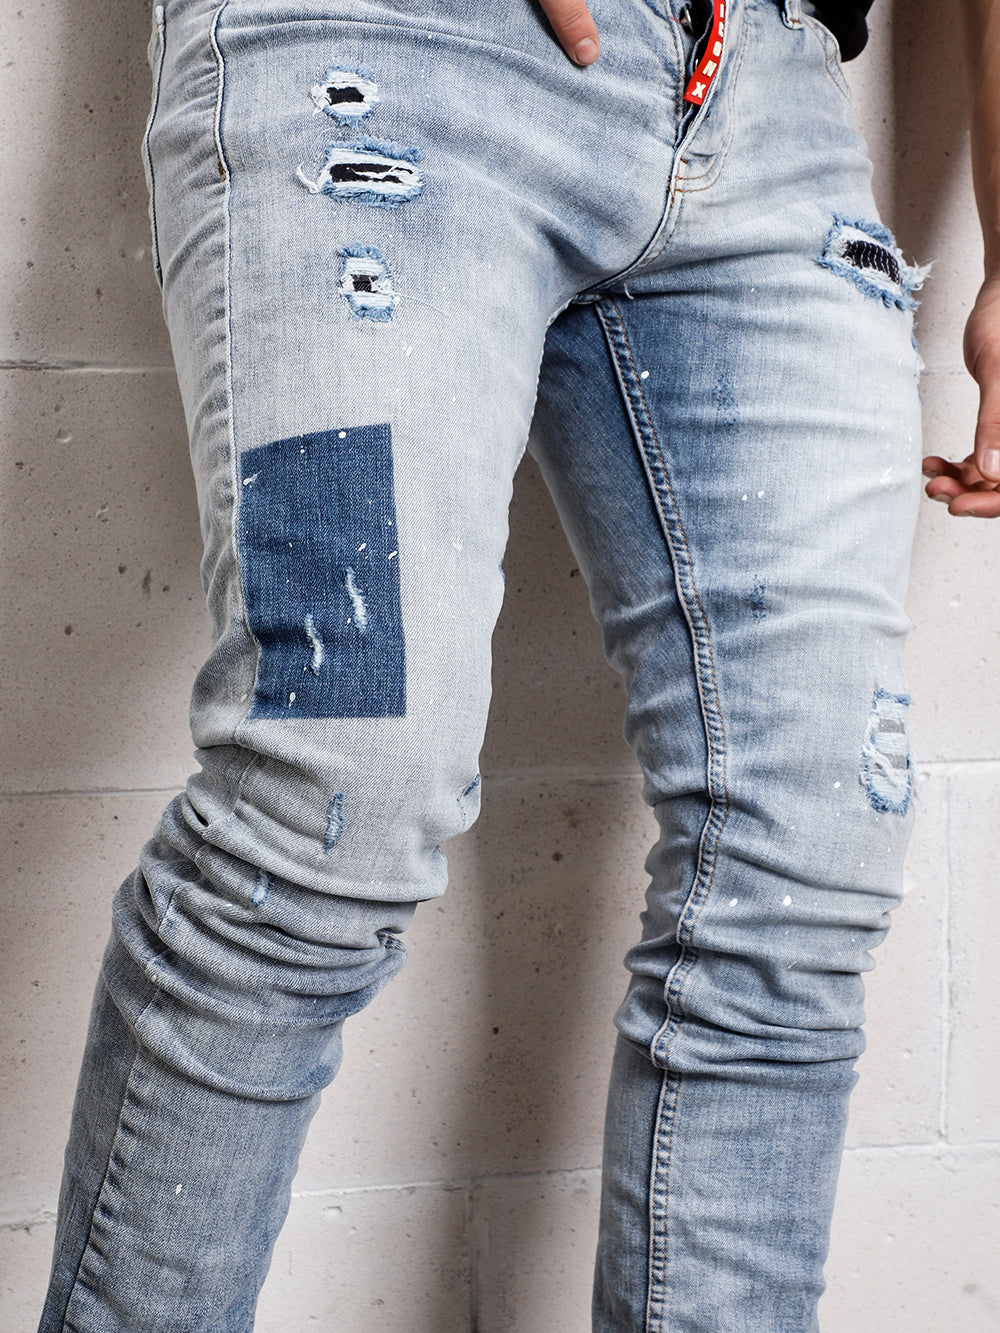 A man wearing ripped jeans with distressed details, leaning against a wall in his SKY BLUE ICON DENIM.